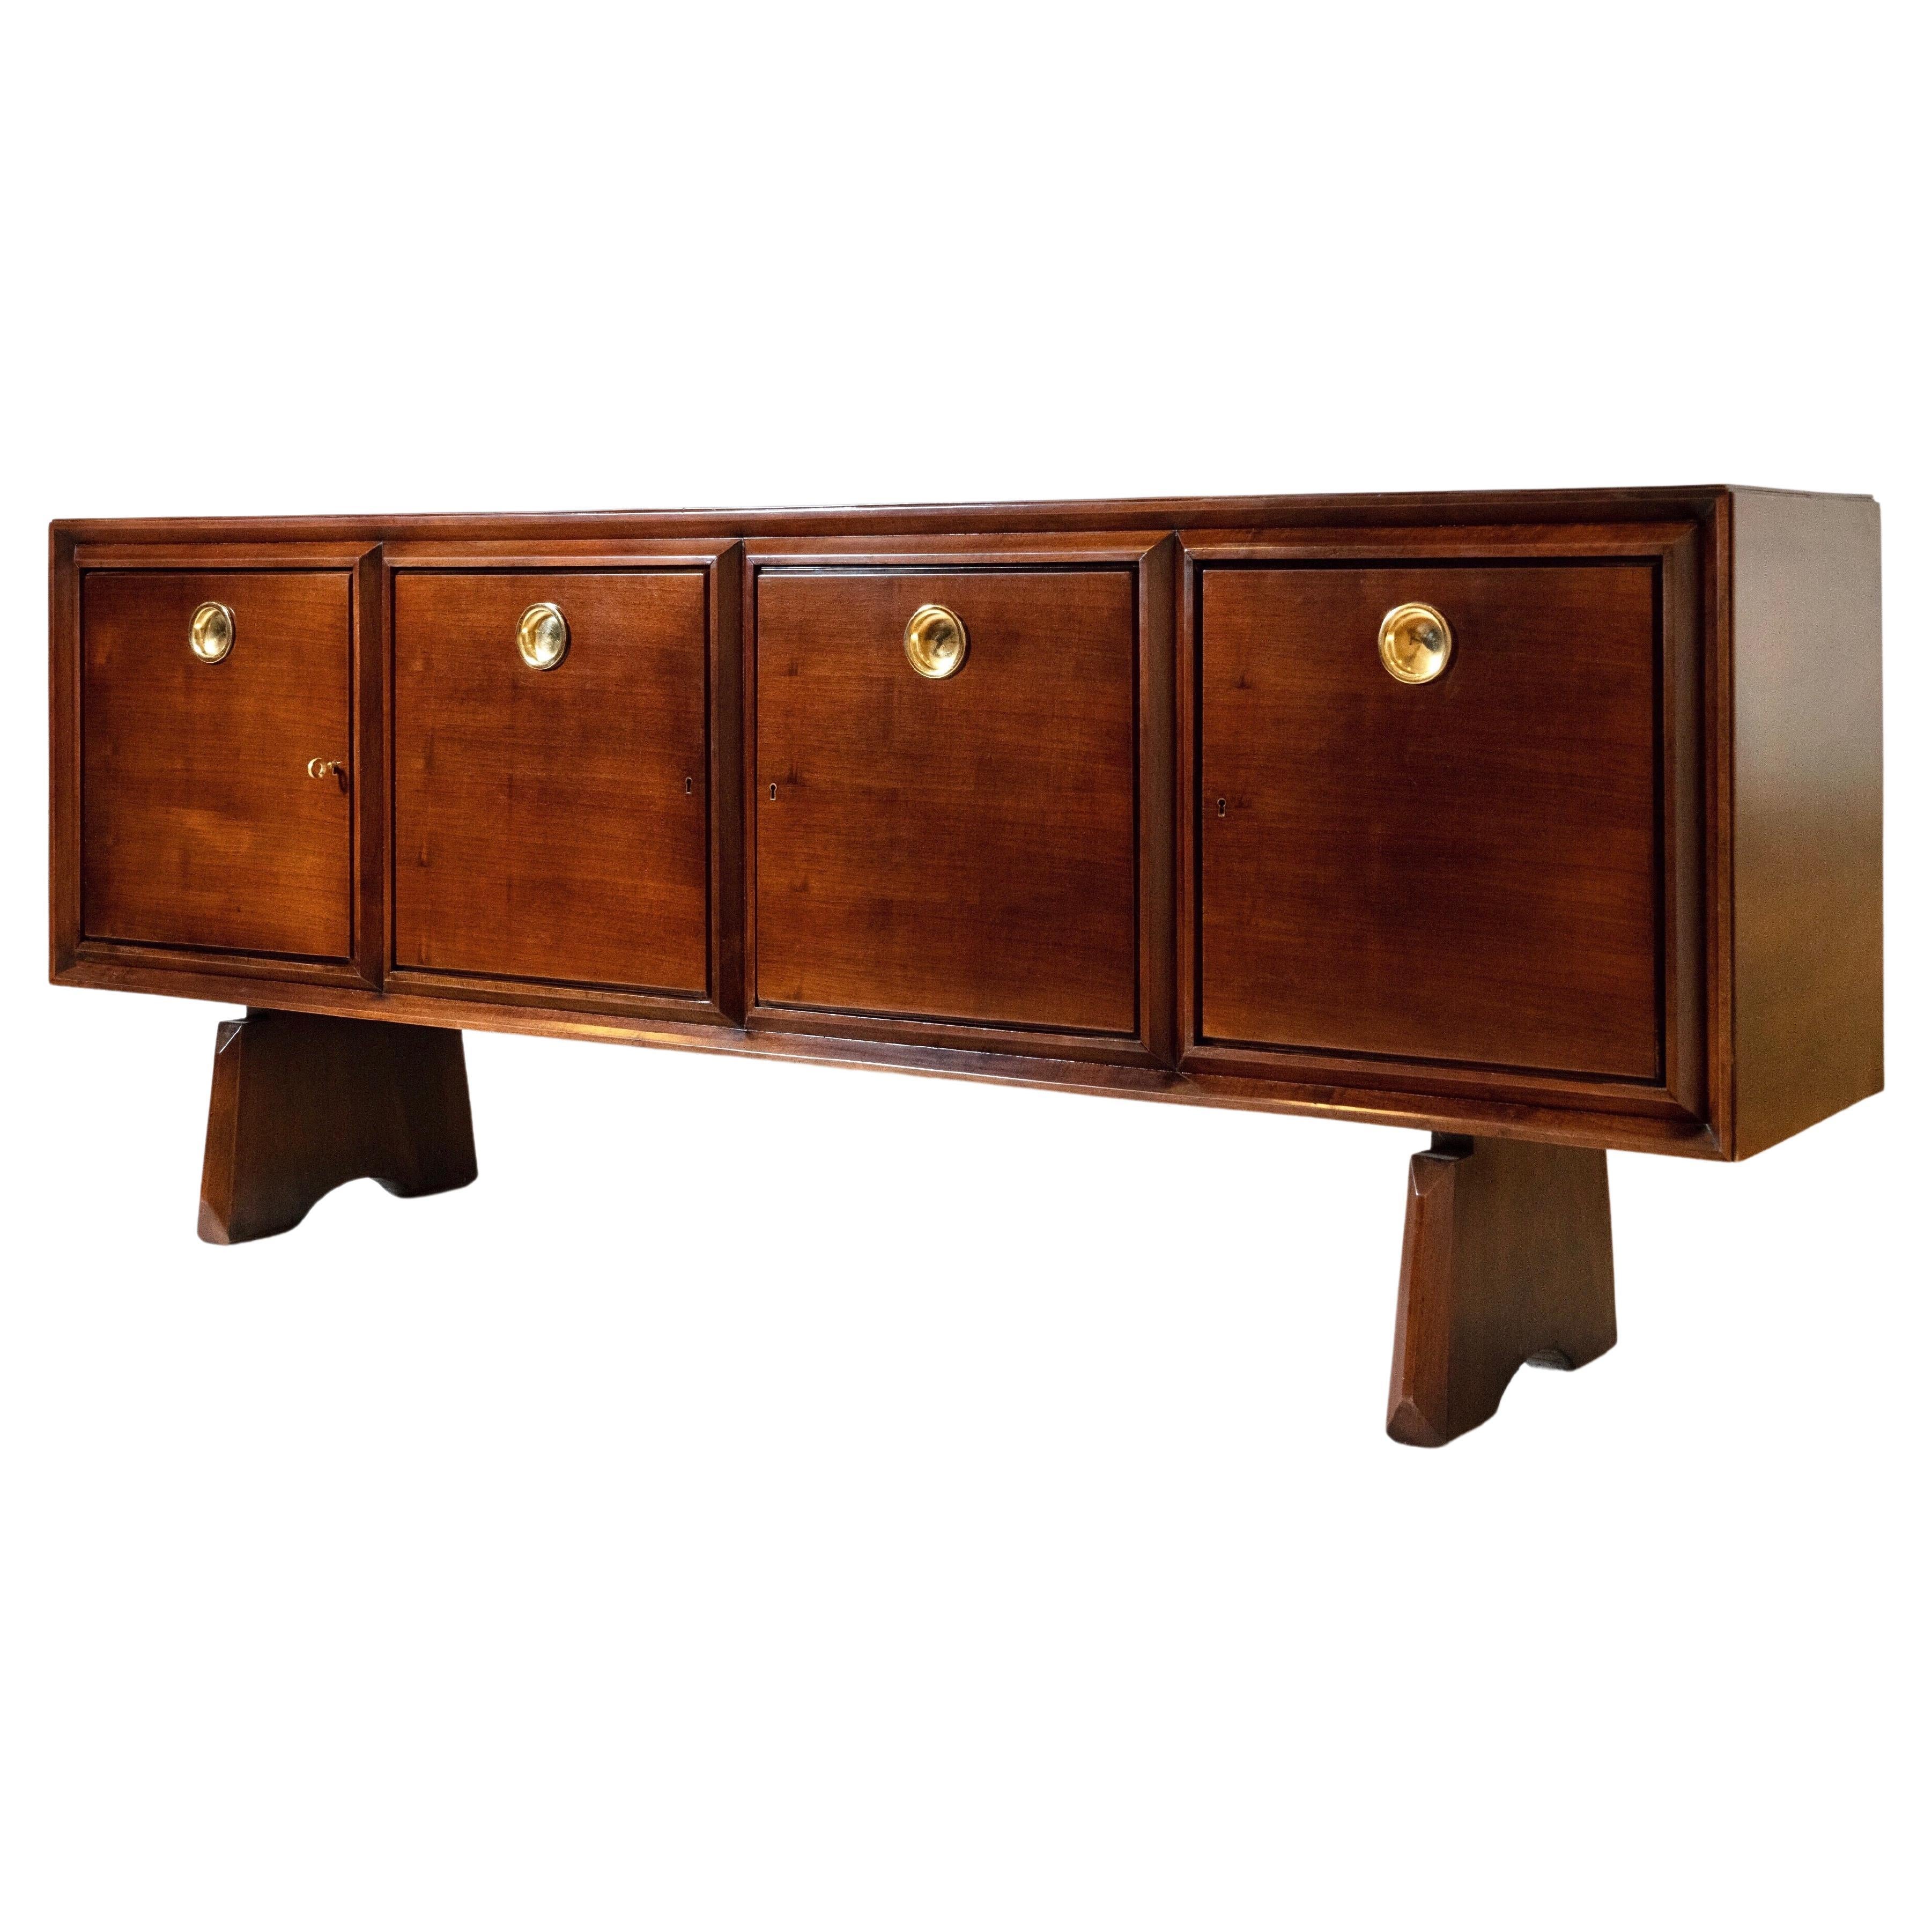 Paolo Buffa: Imposing Four-Door Cabinet in Walnut and Polished Brass, Italy 1950 For Sale